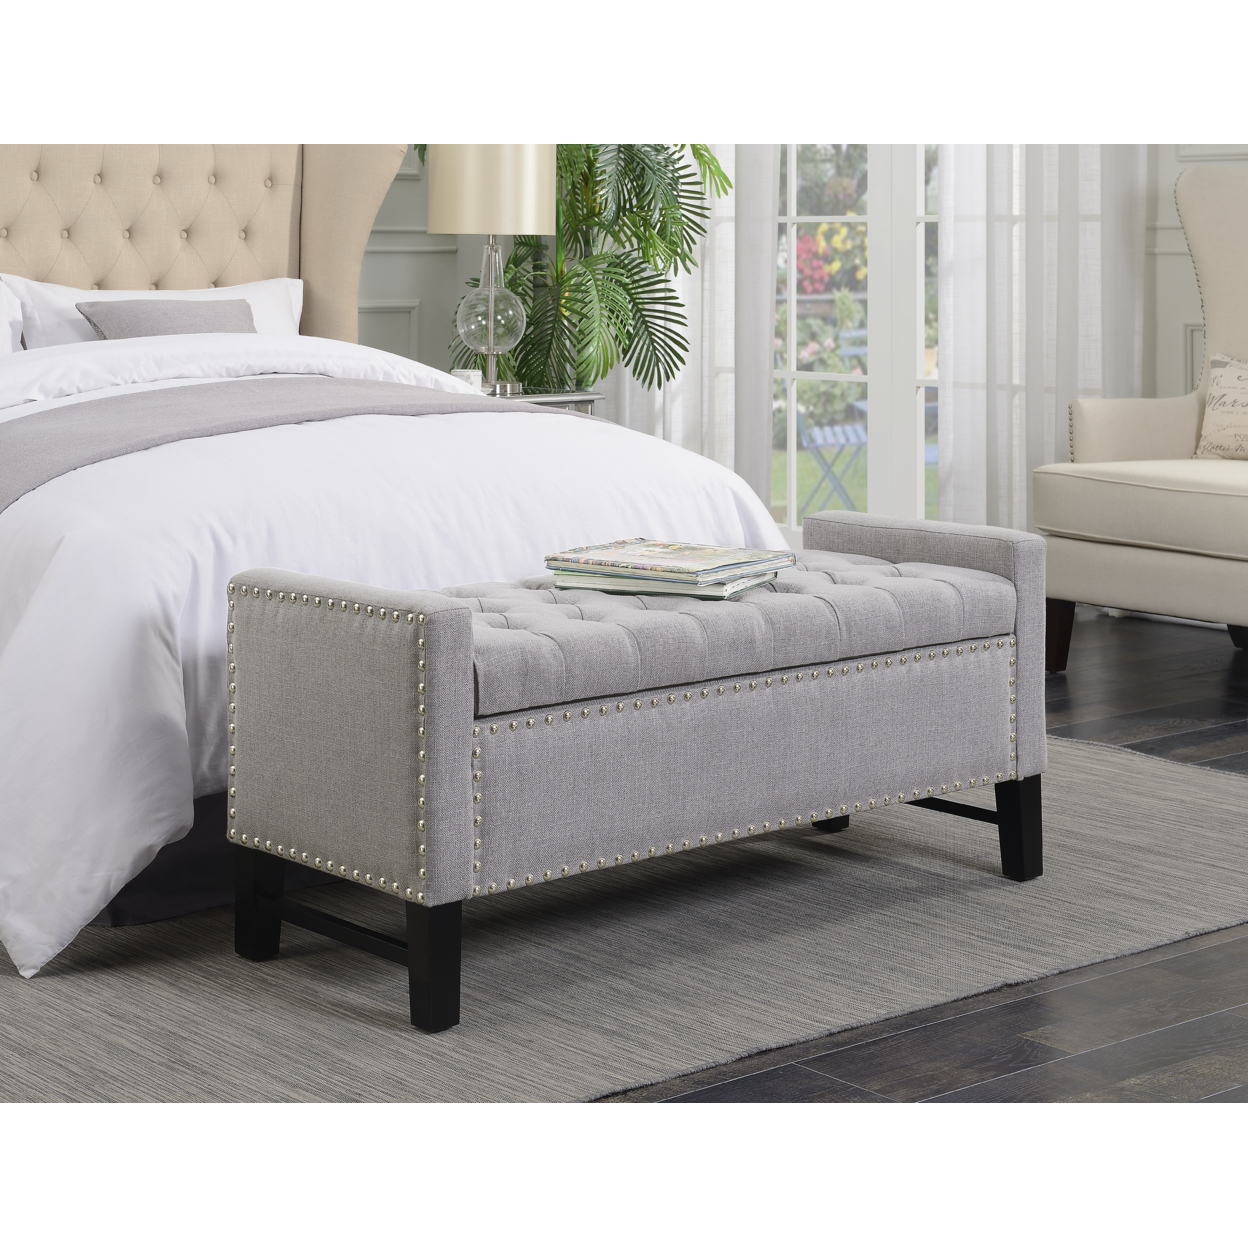 Michael Linen Modern Contemporary Button Tufted With Silver Nailheads Deco On Frame Storage Lid Bench - Light Grey